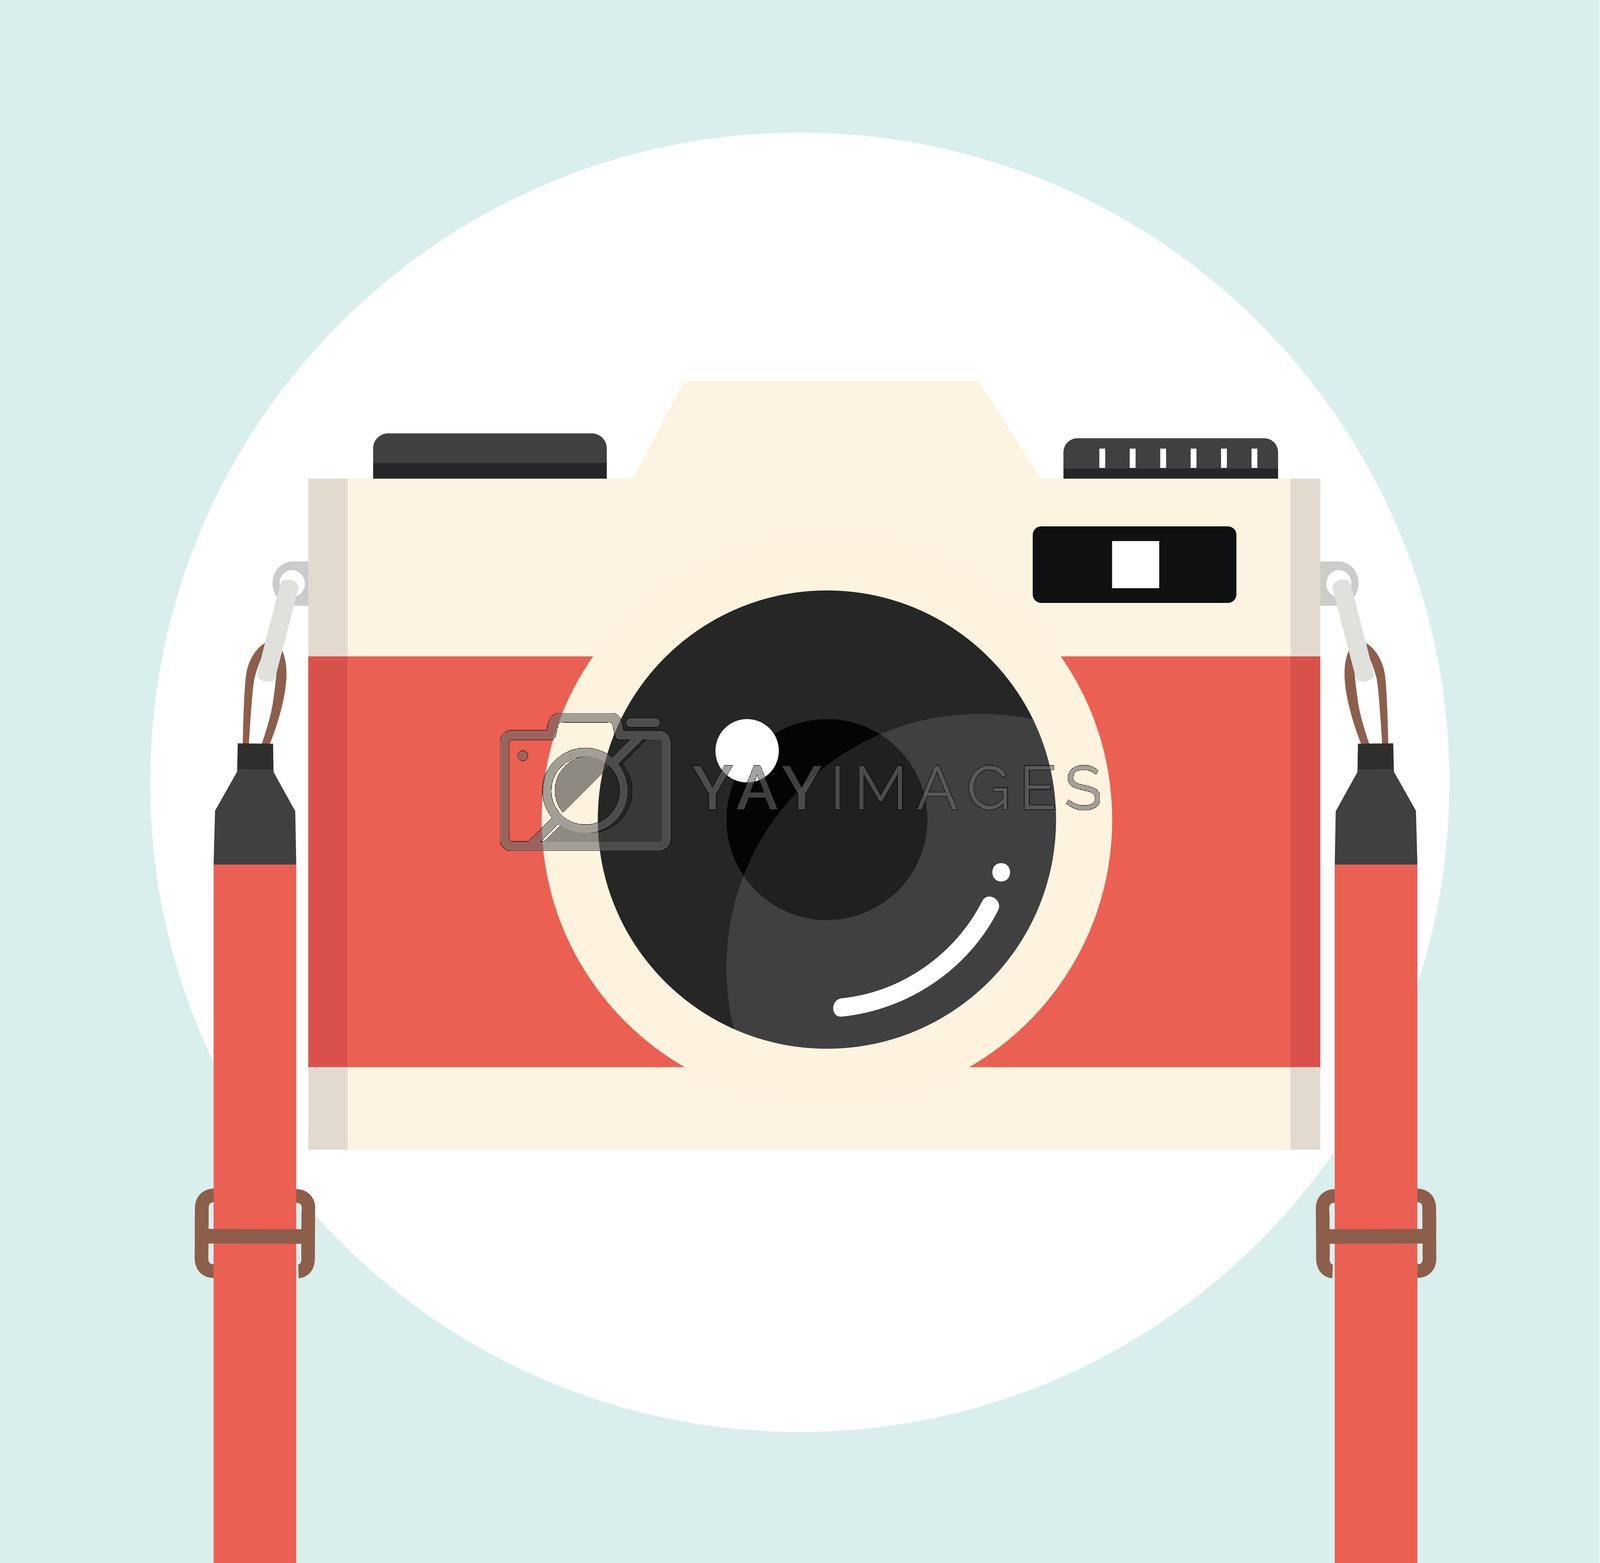 Royalty free image of Retro camera  style colors background. camera with strap by focus_bell